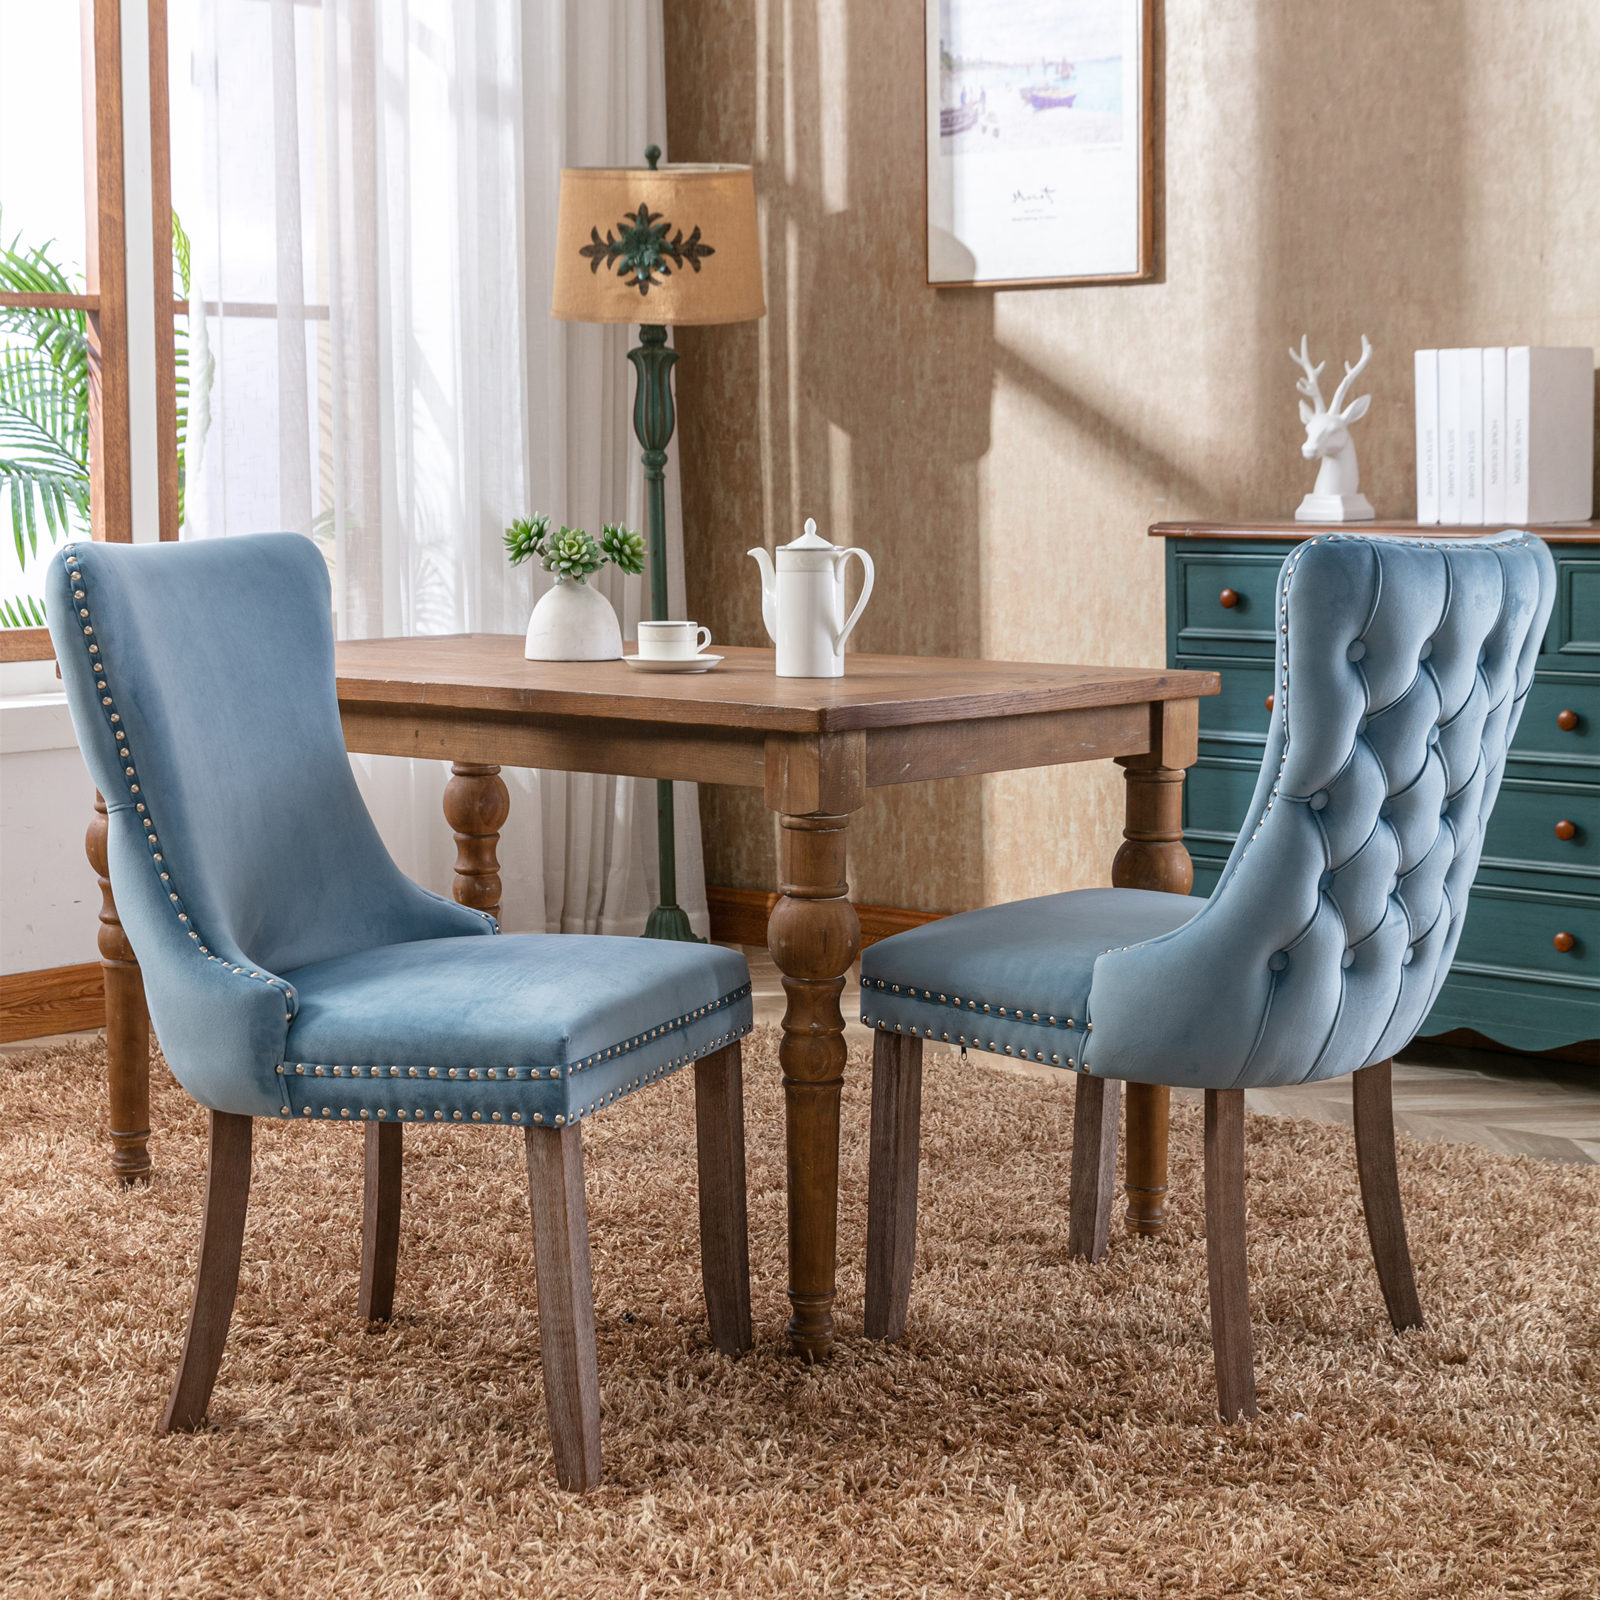 Wren Dining Chair, Shop Upholstered Dining Chairs